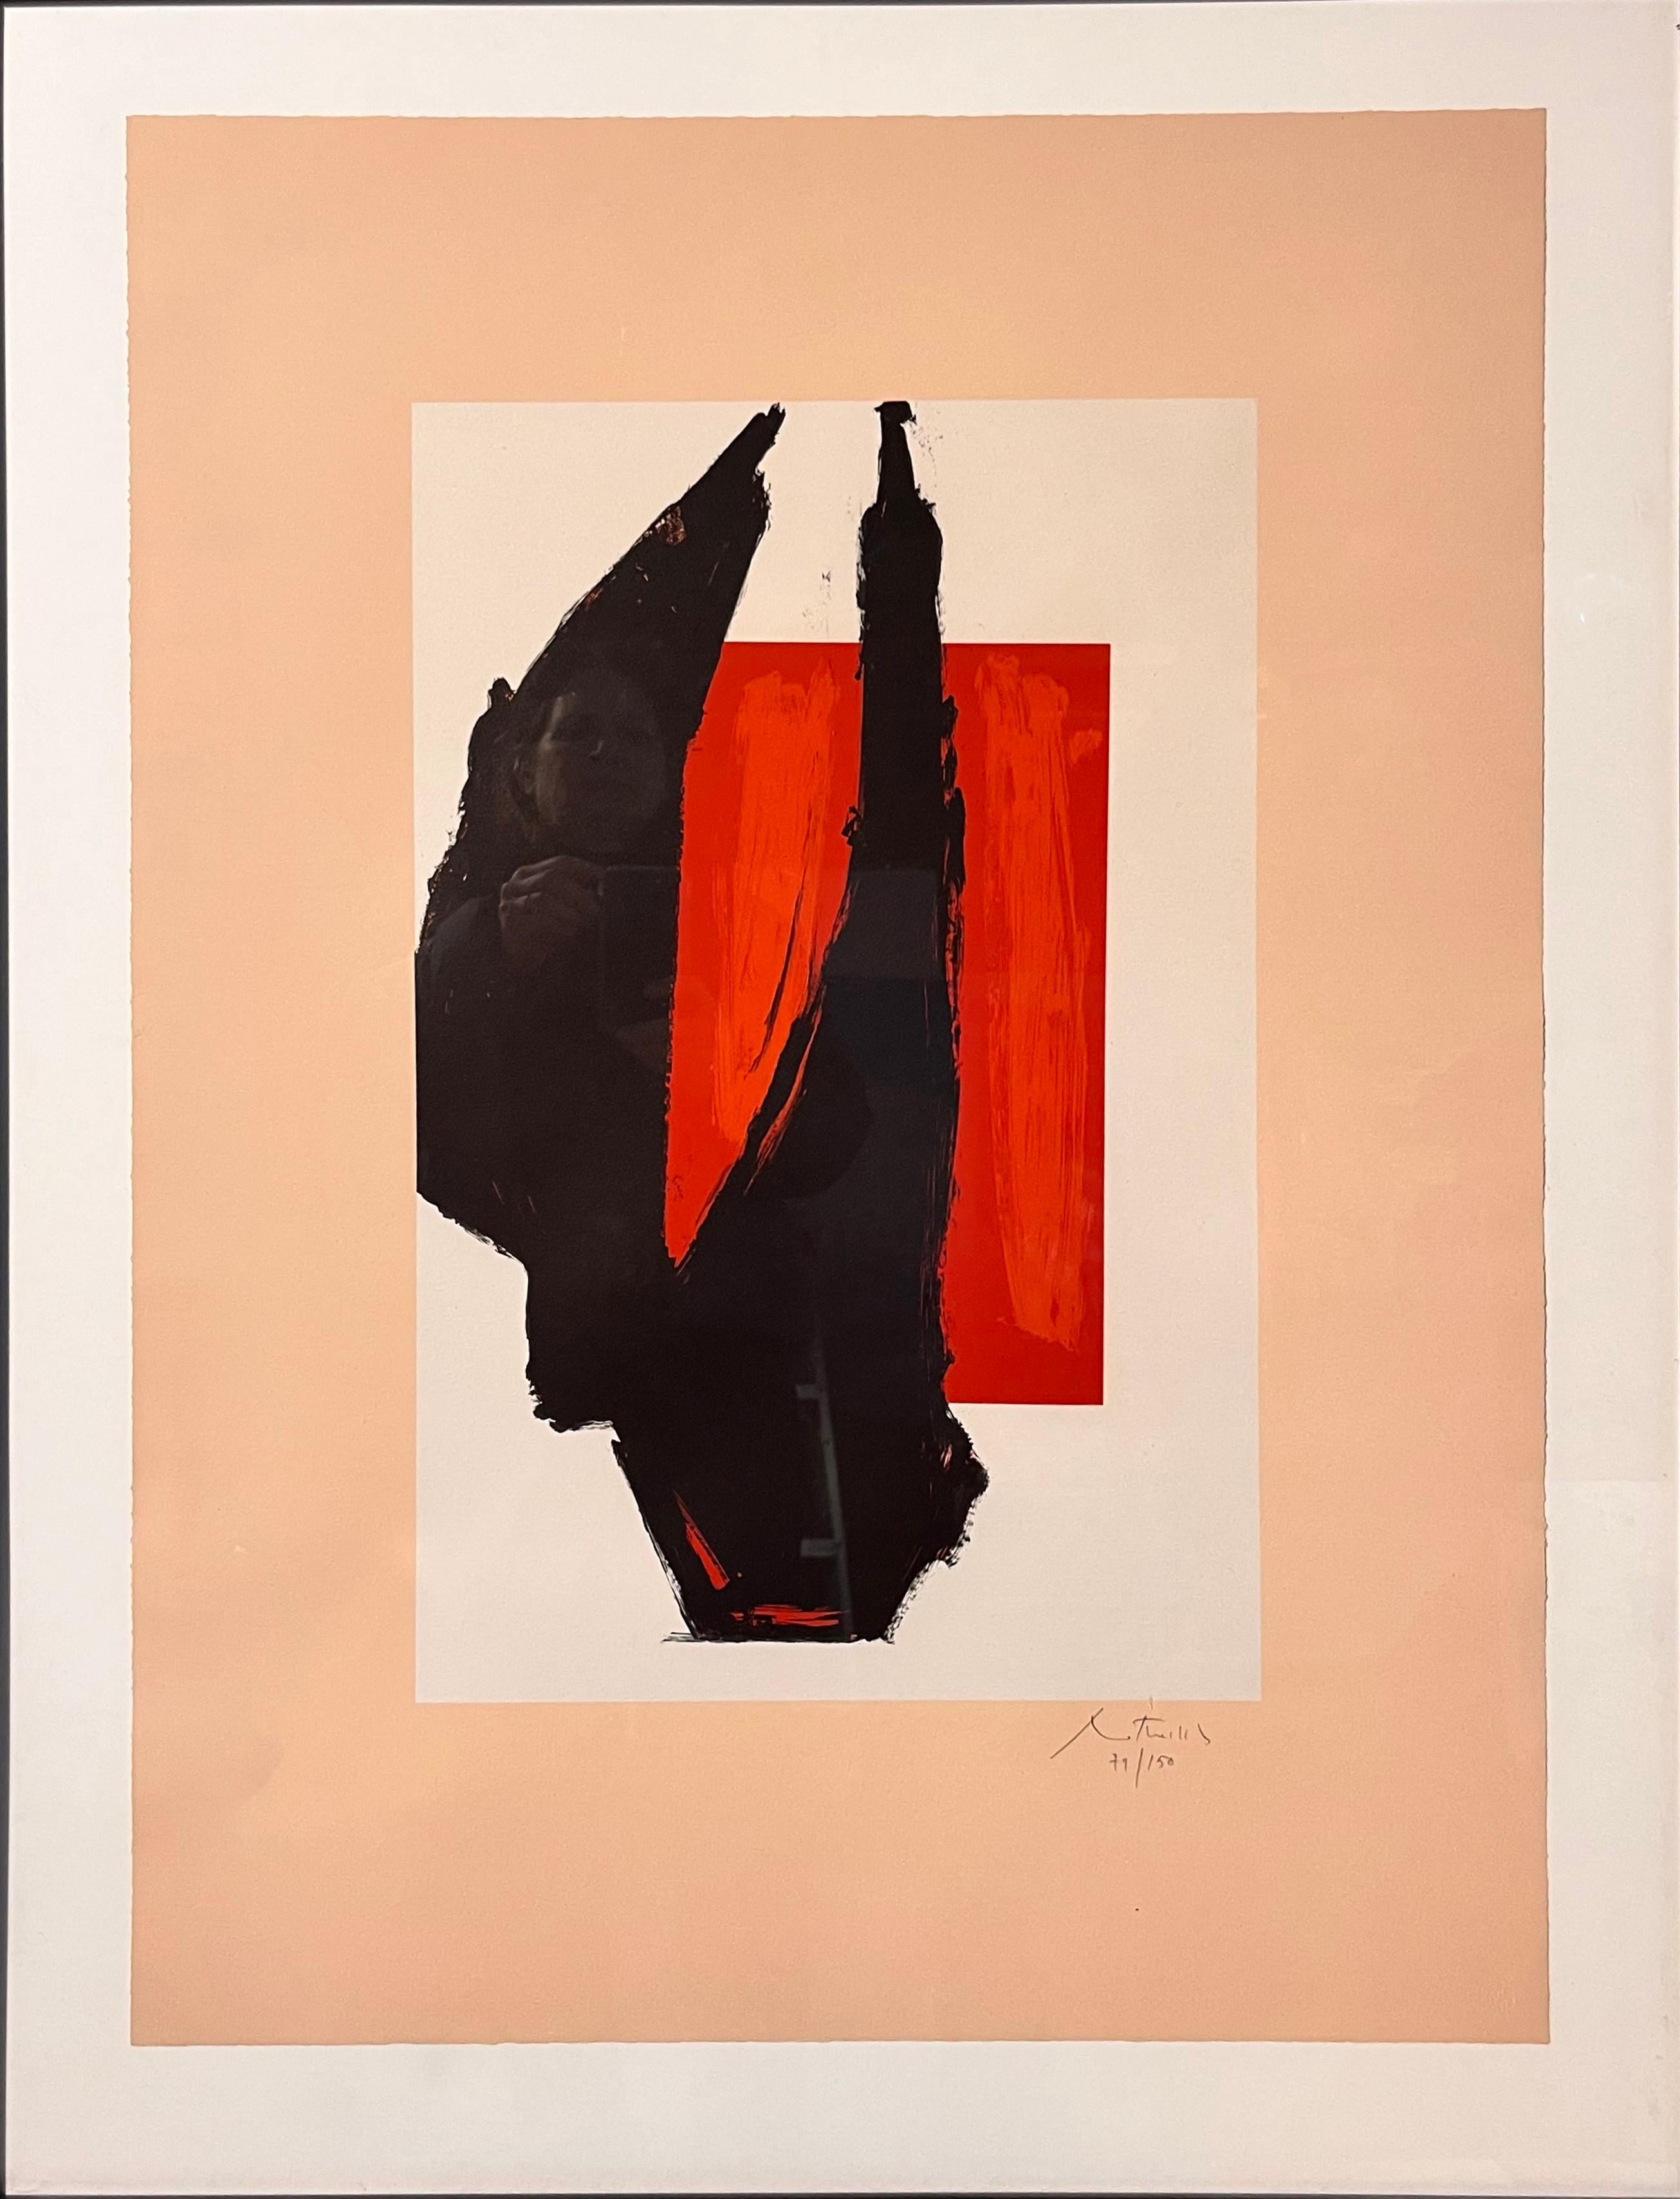 This classic lithograph by renowned artist Robert Motherwell was created for the 1981 art Chicago show at Navy Pier. Motherwell was known for his bold forms and vibrant colors, making his works highly recognizable and influential in art.
The